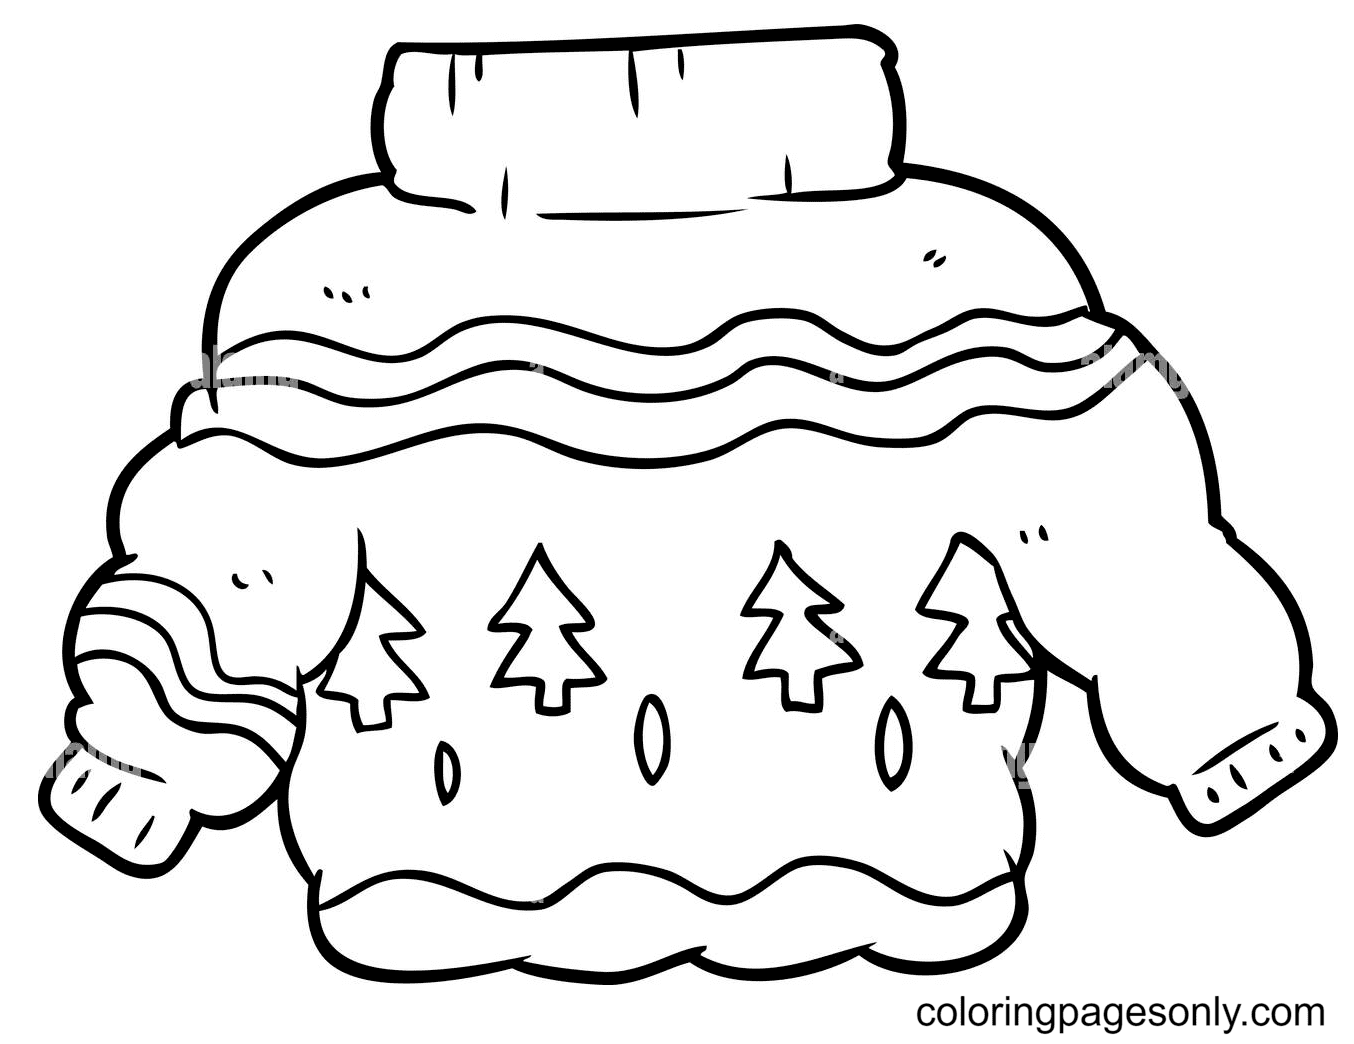 Cute Sweater with Christmas Tree Coloring Page